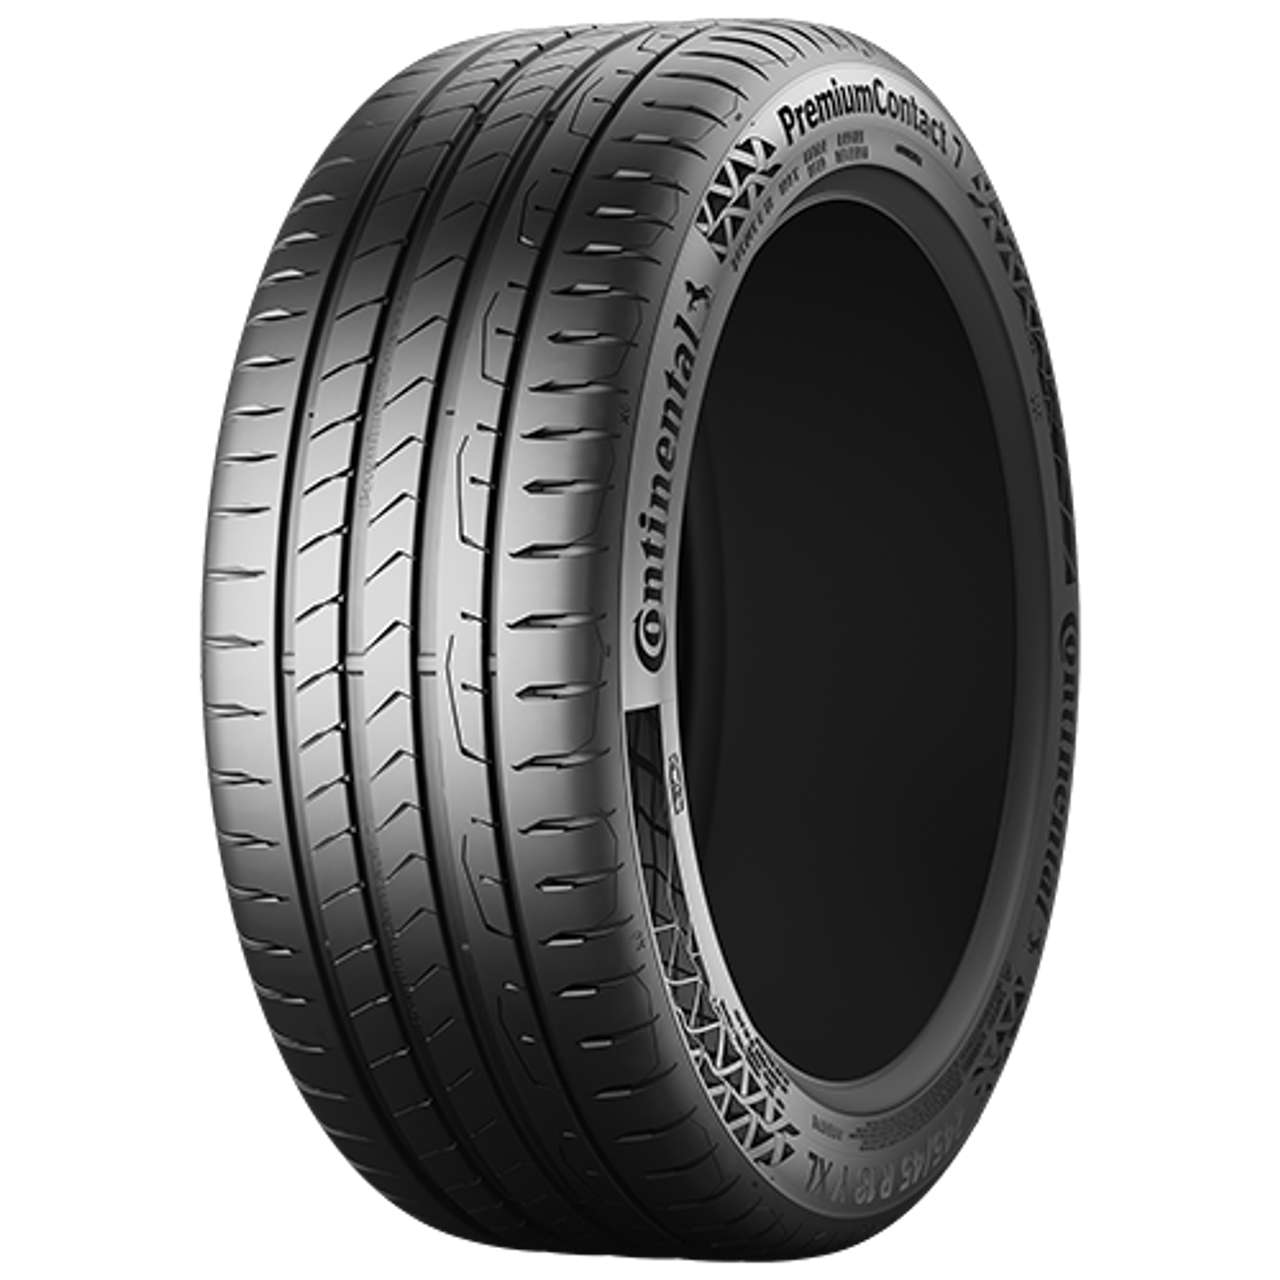 CONTINENTAL PREMIUMCONTACT 7 (EVc) 215/65R16 102V BSW XL